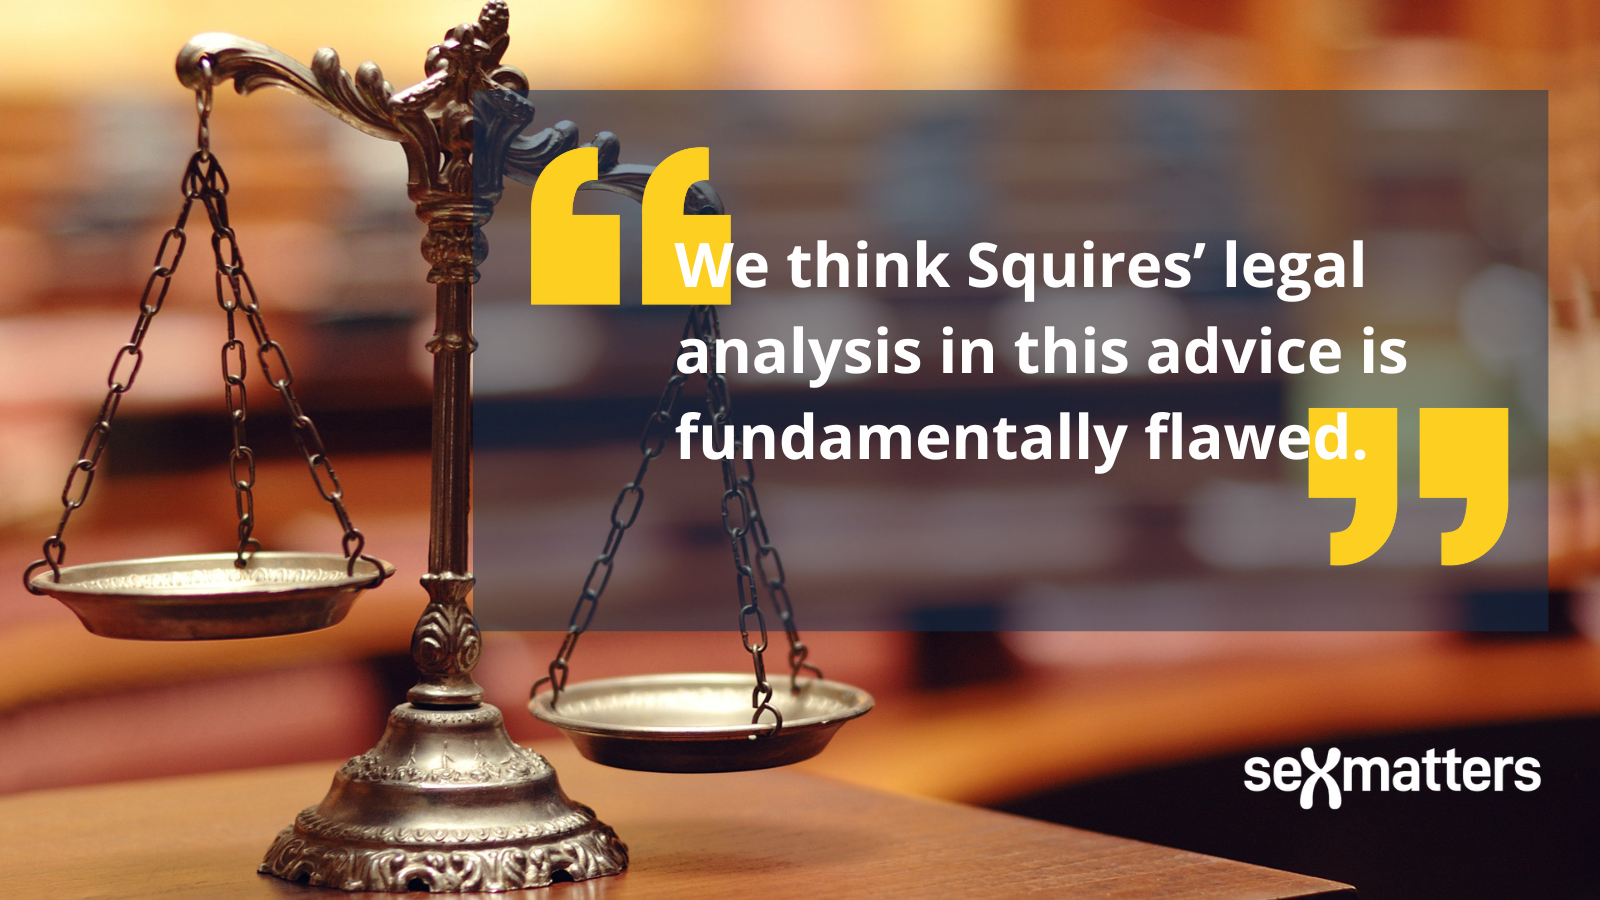 "We think Squires’ legal analysis in this advice is fundamentally flawed."